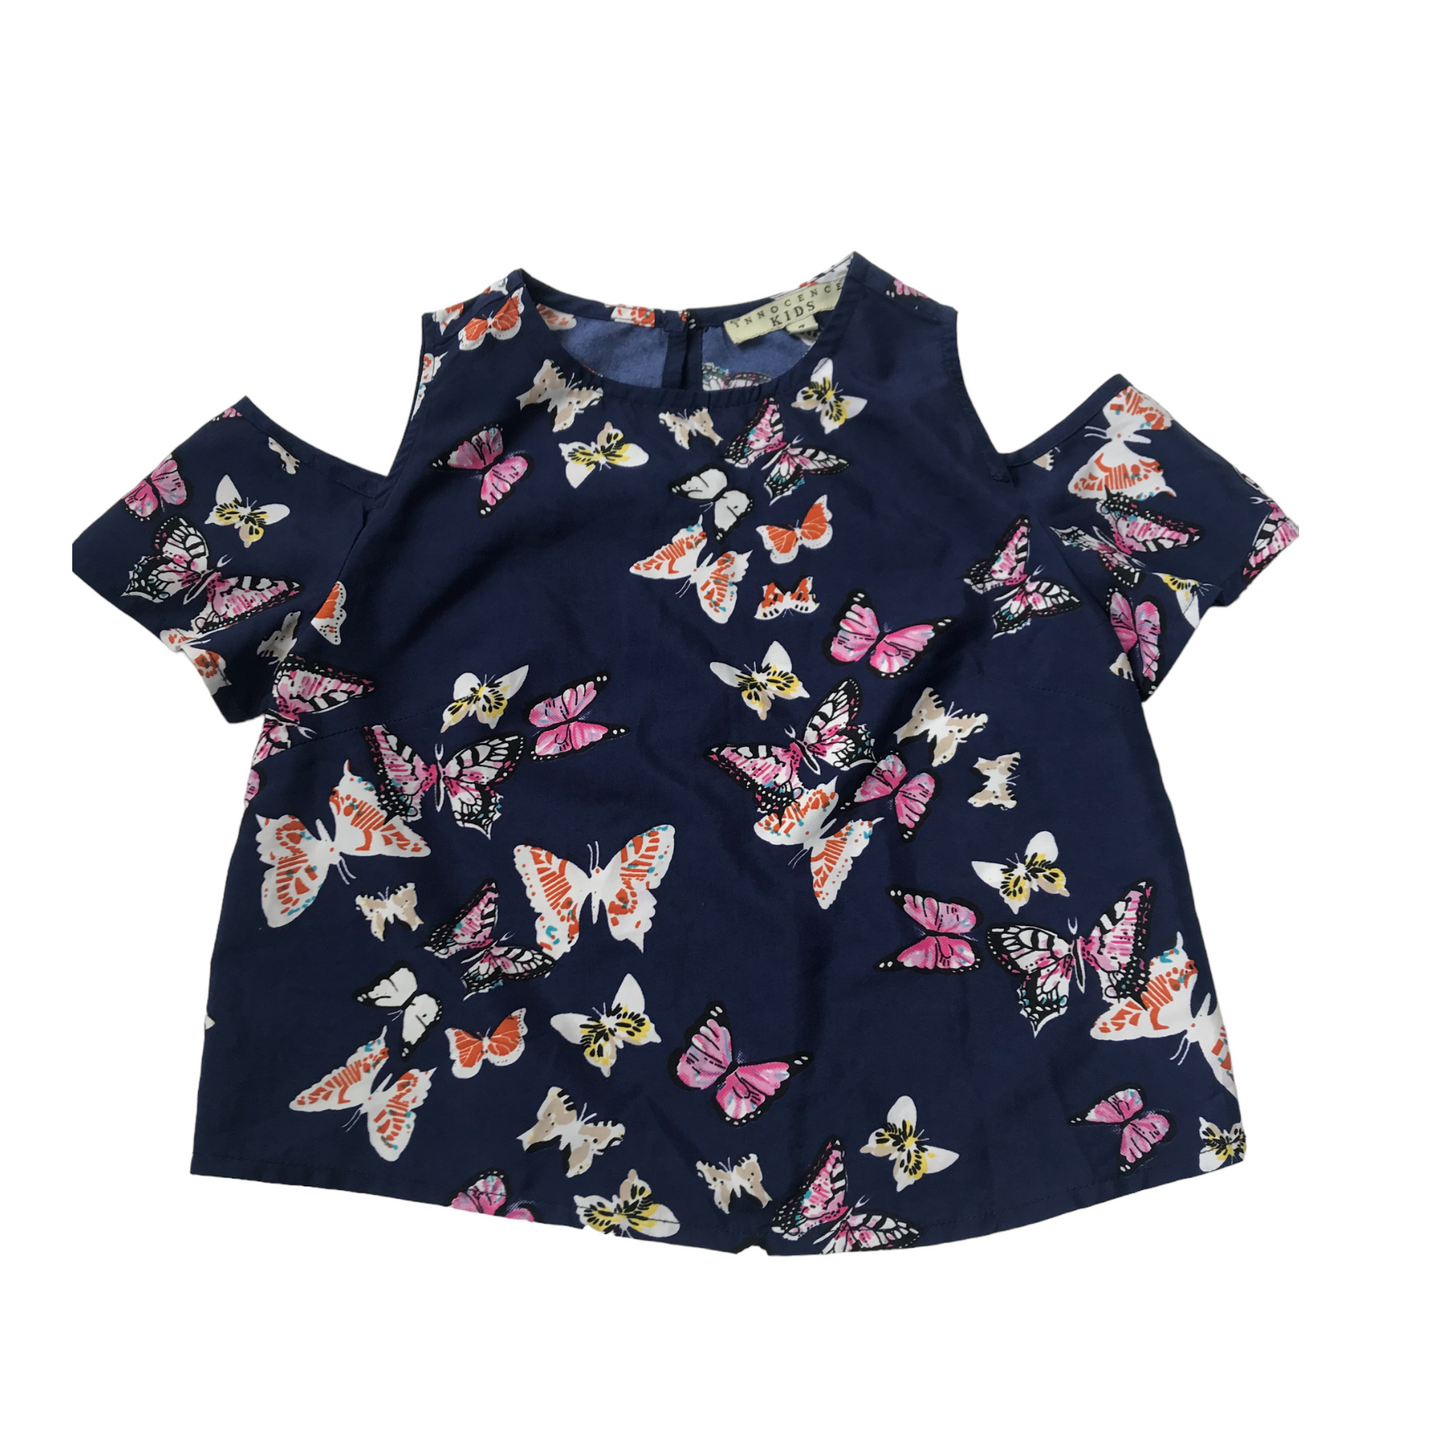 Innocence Navy Blue Butterfly Summer Top Age 7